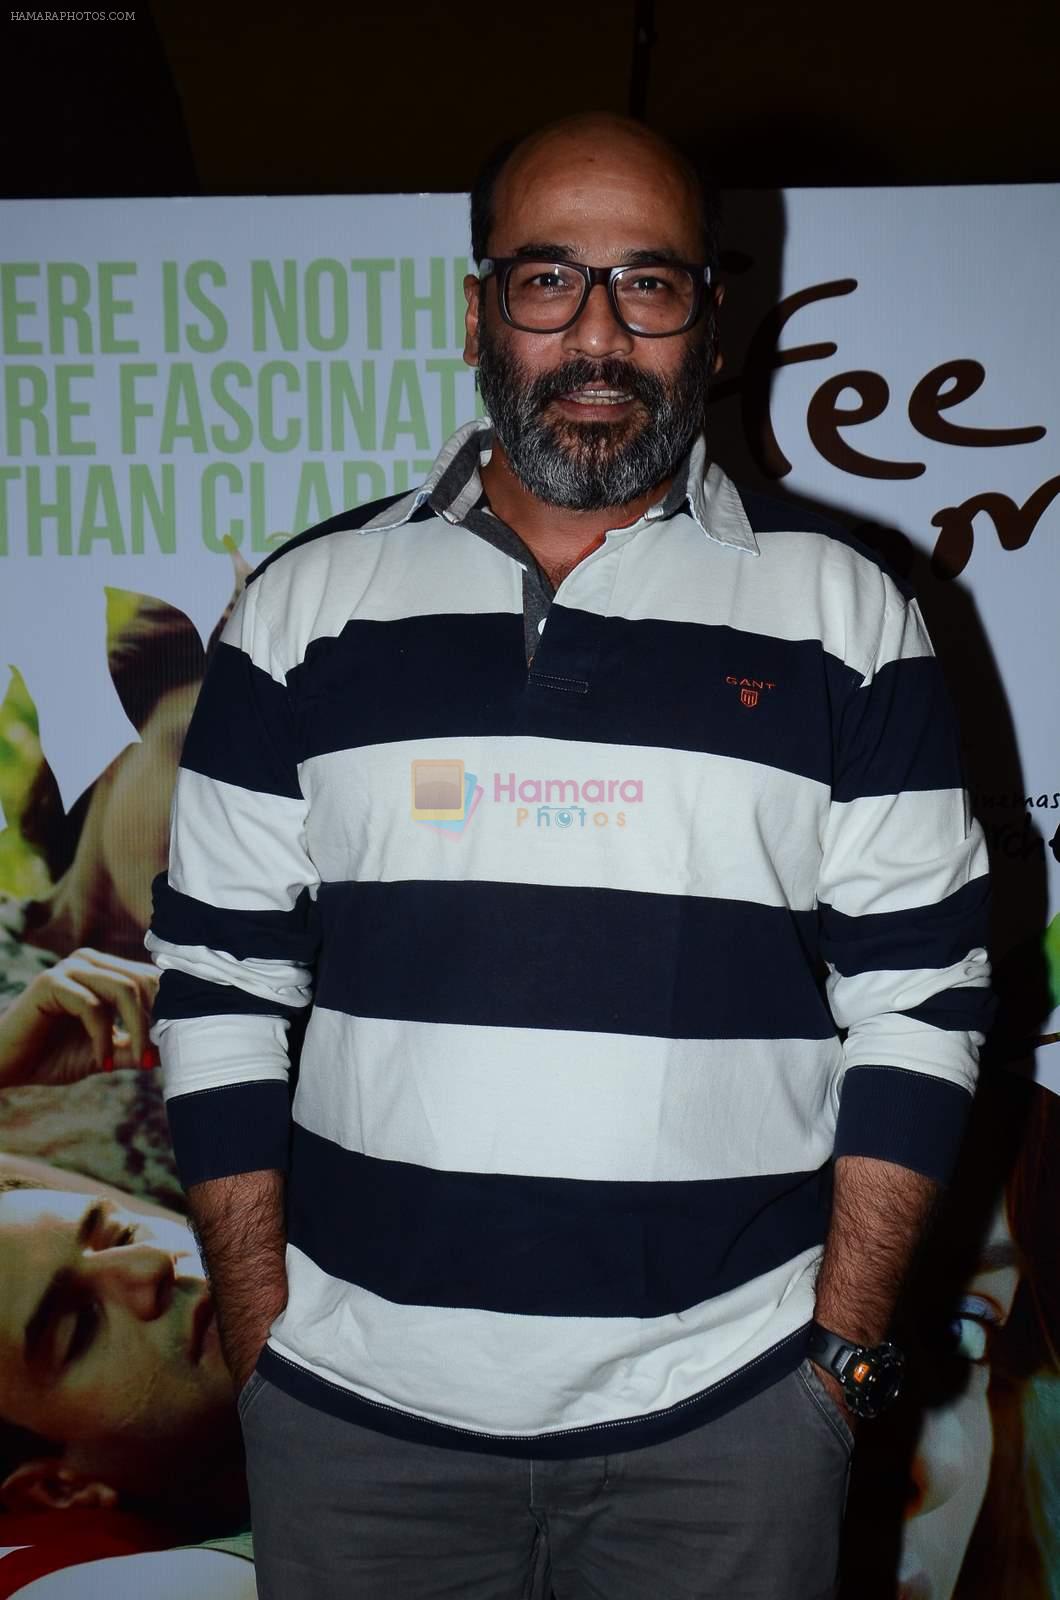 Mohan Kapoor at Coffee Bloom premiere in PVR on 5th March 2015